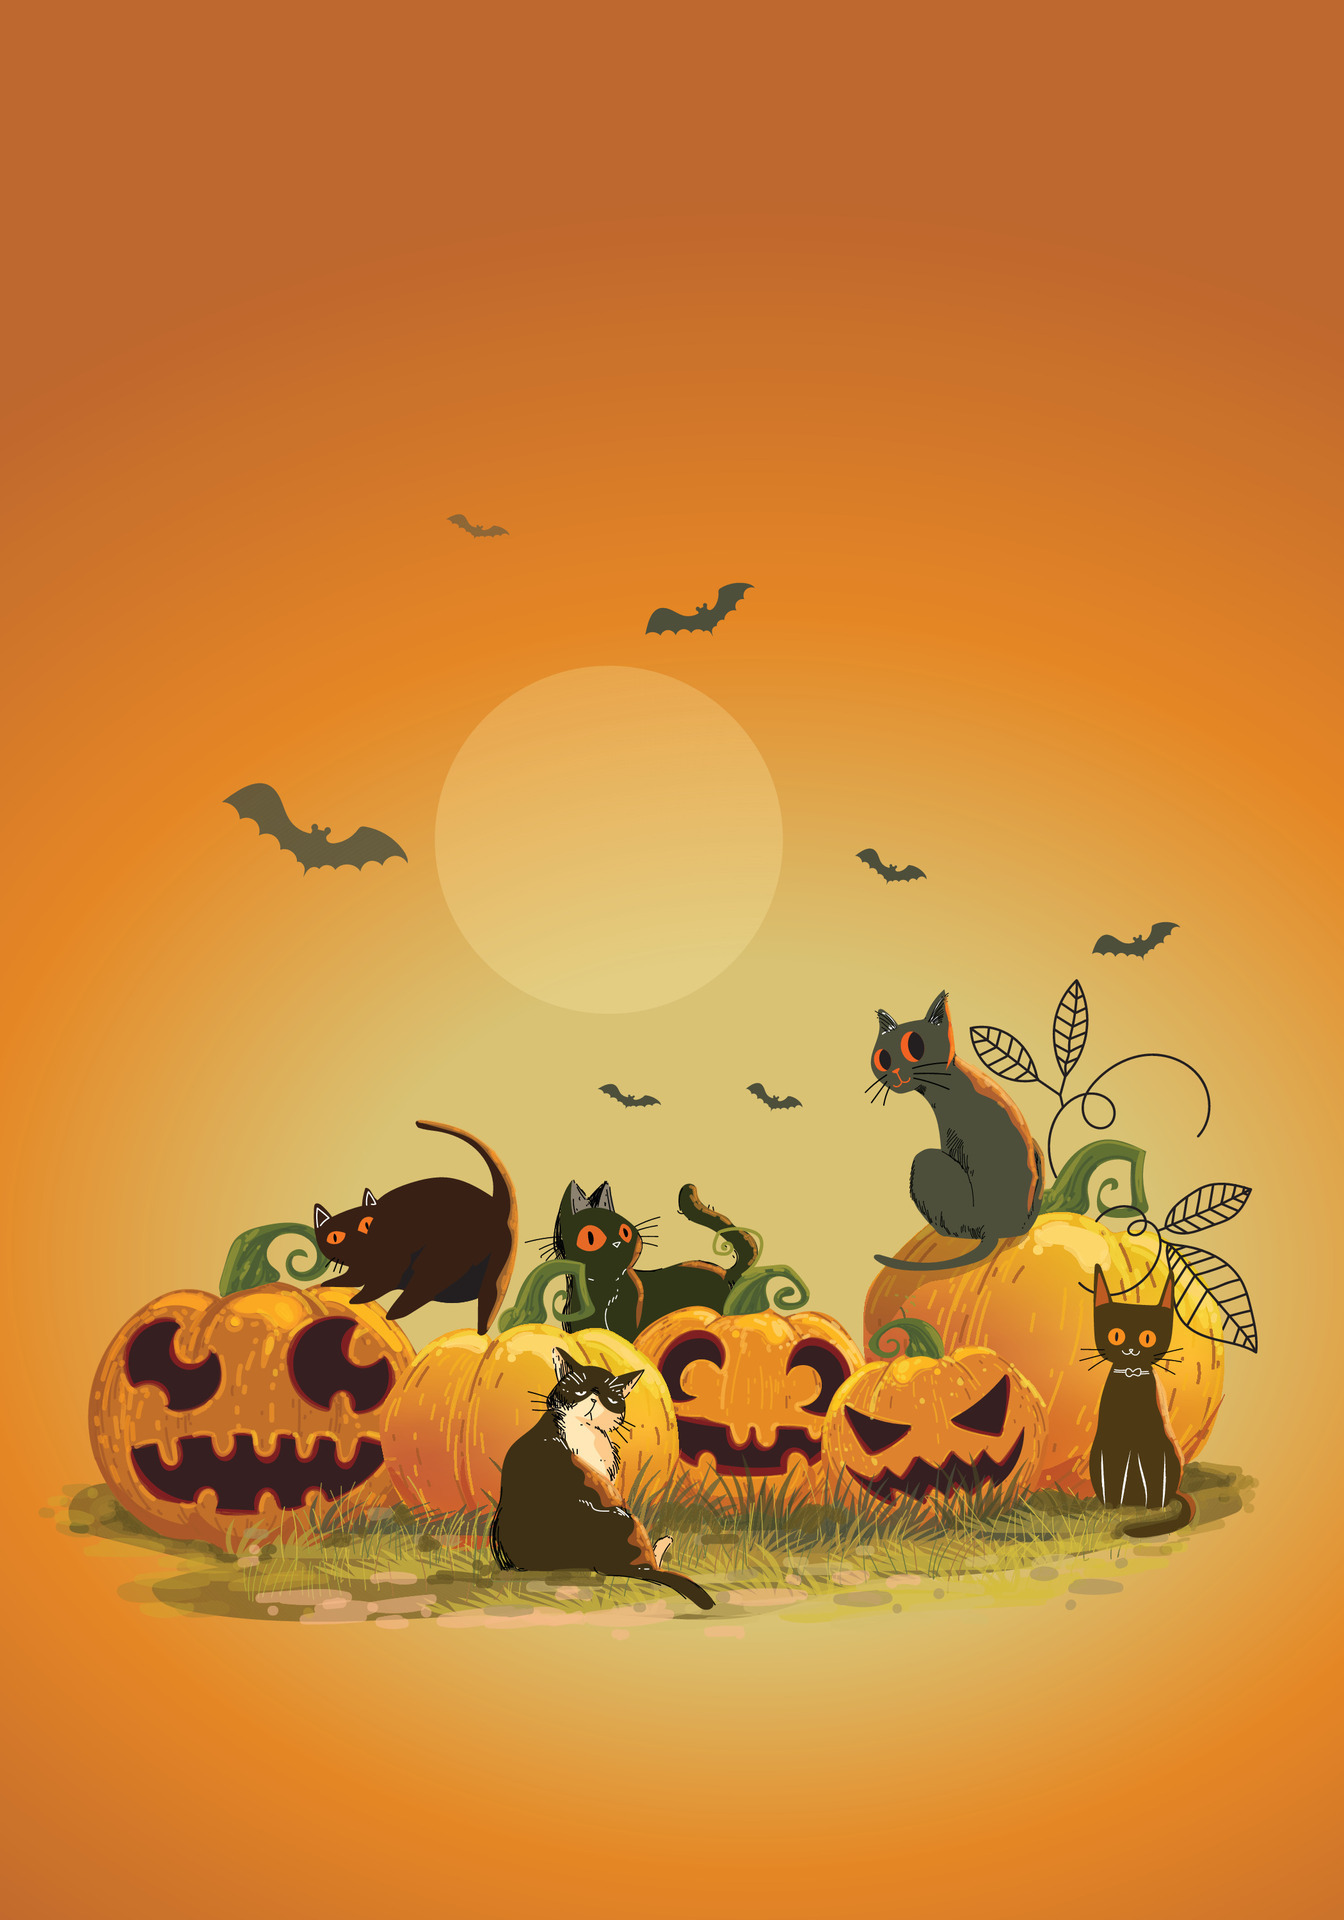 cute halloween backgrounds for iphone